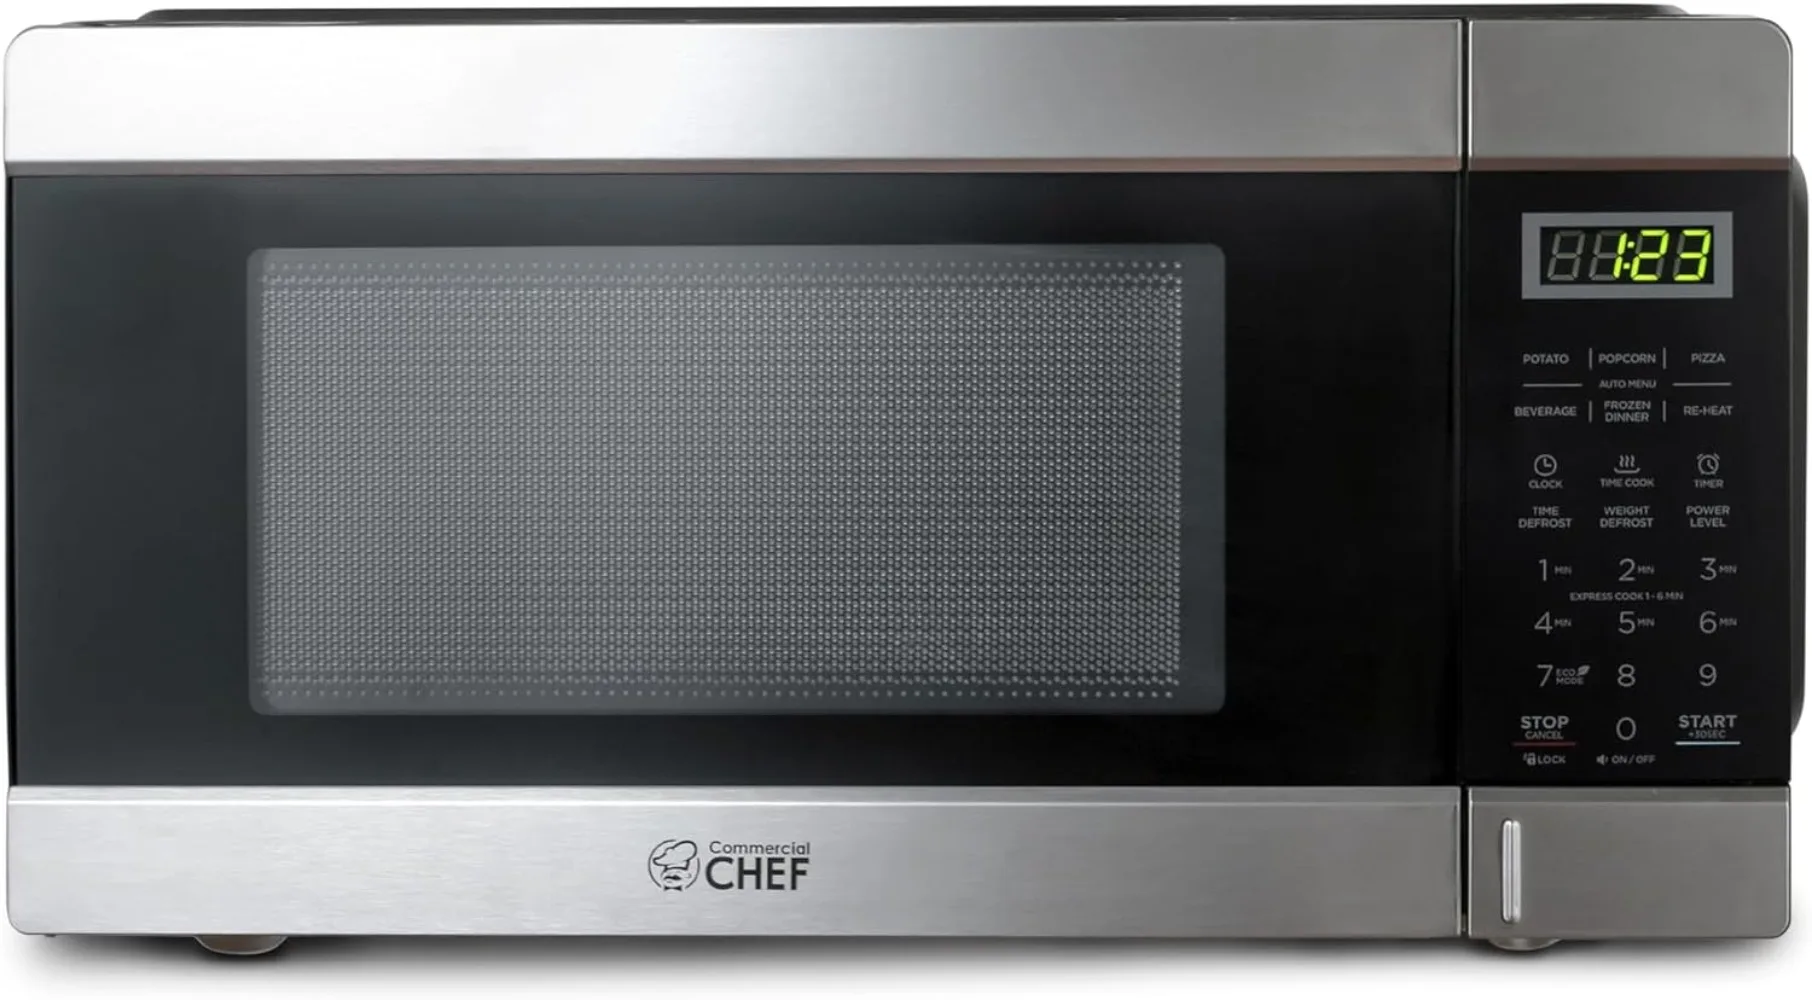 

COMMERCIAL CHEF 1.1 Cu Ft Microwave with 10 Power Levels, Small Microwave with Push Button, 1000W Countertop Microwave